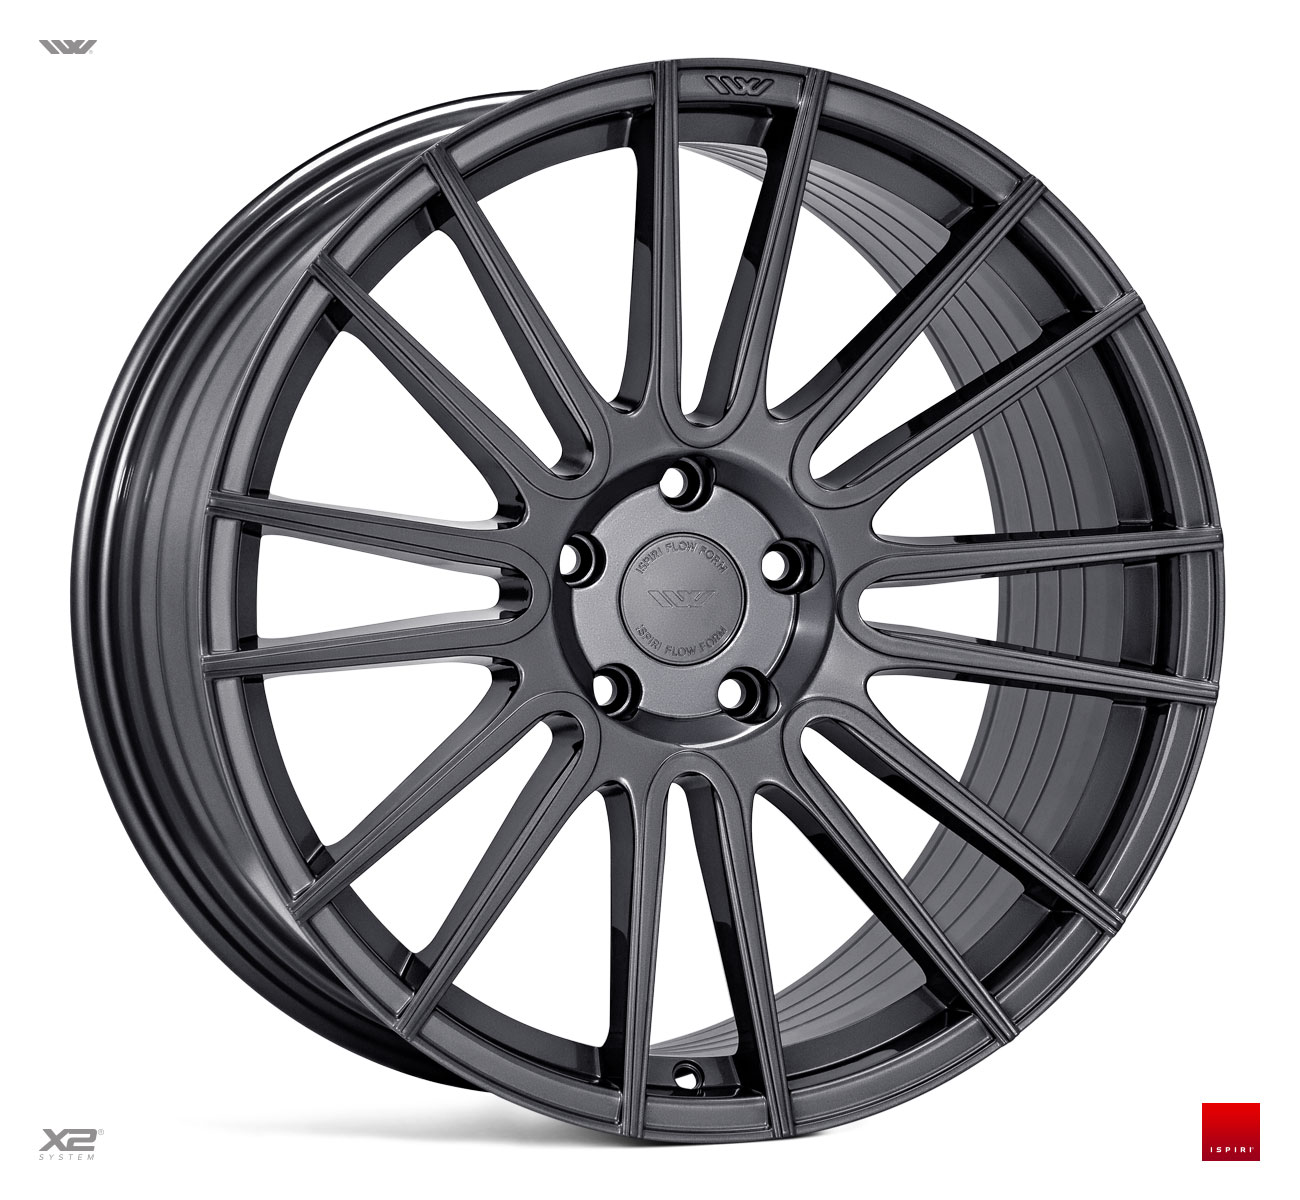 NEW 20" ISPIRI FFR8 8-TWIN CURVED SPOKE ALLOY WHEELS IN CARBON GRAPHITE, DEEP CONCAVE 9.5/10.5"